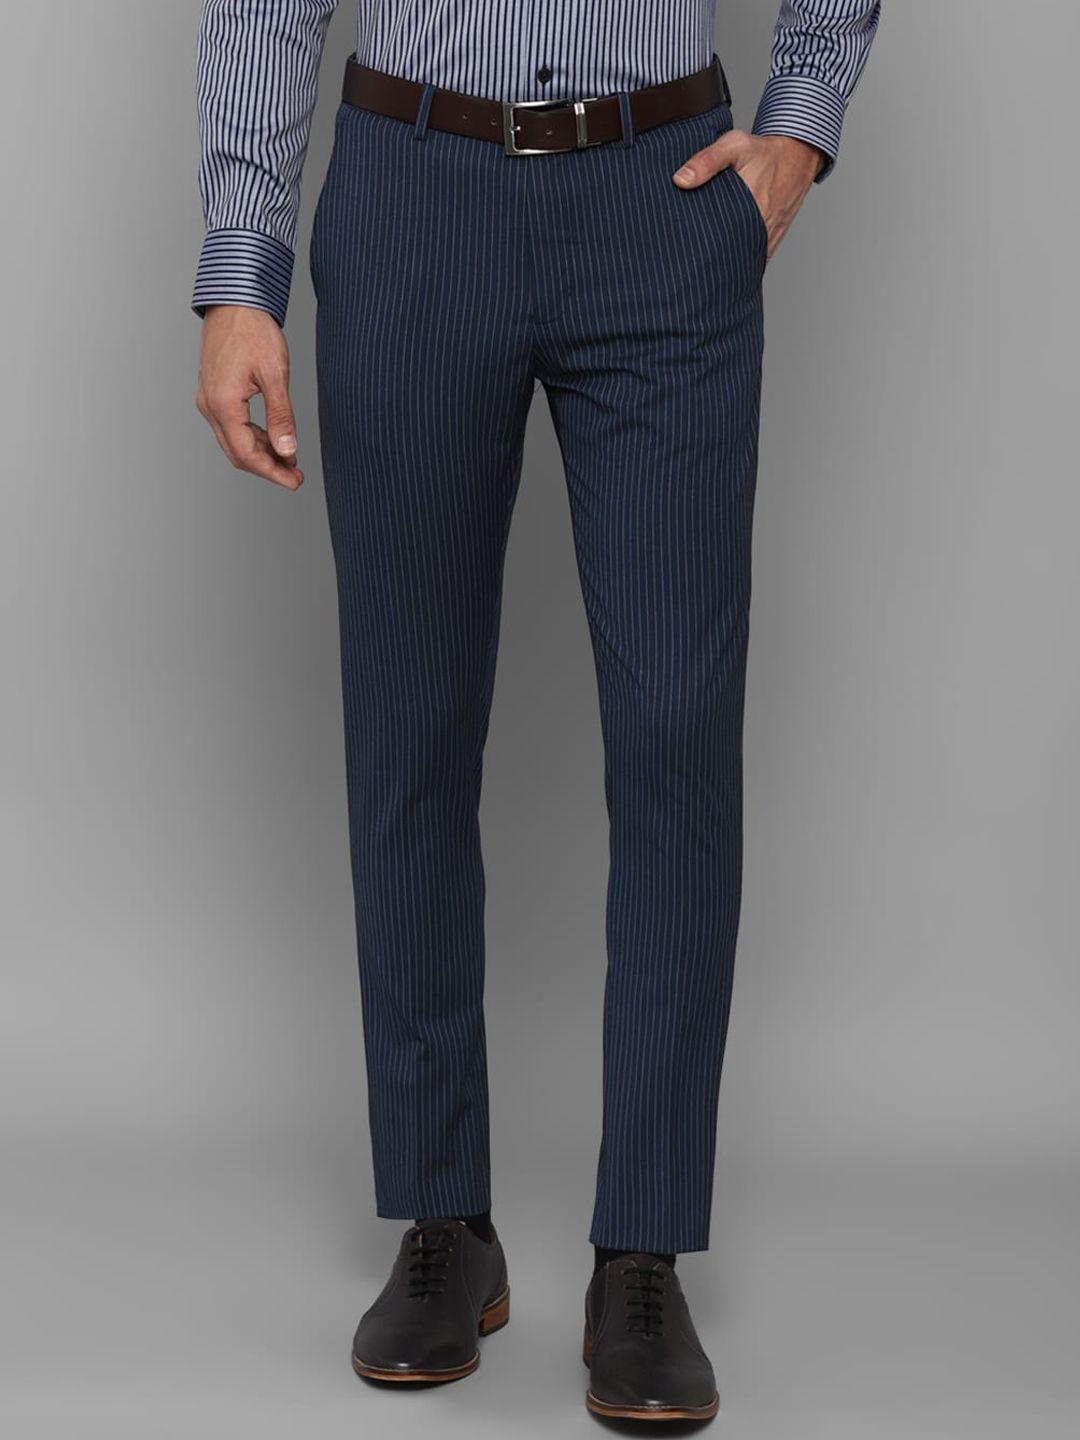 louis-philippe-men-navy-blue-striped-trousers